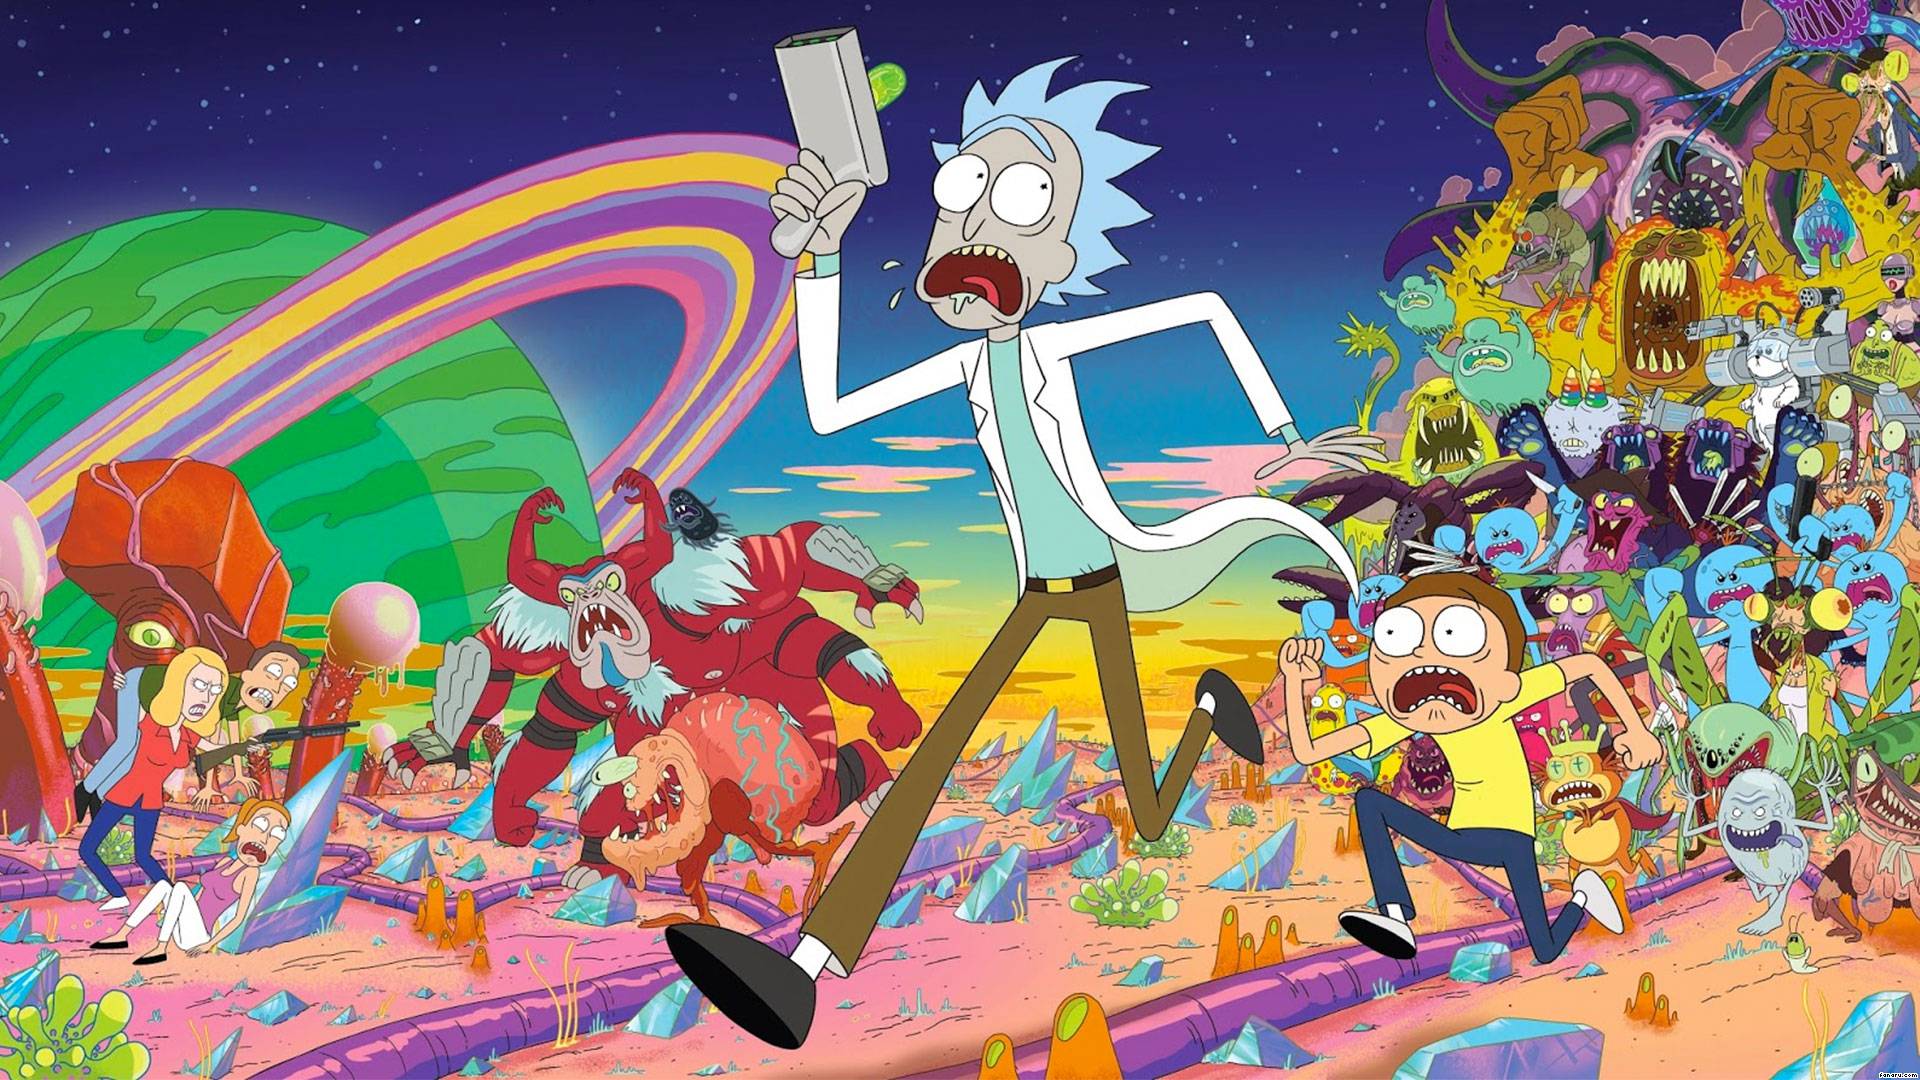 Rick And Morty wallpaper, Cartoon, HQ Rick And Morty pictureK Wallpaper 2019